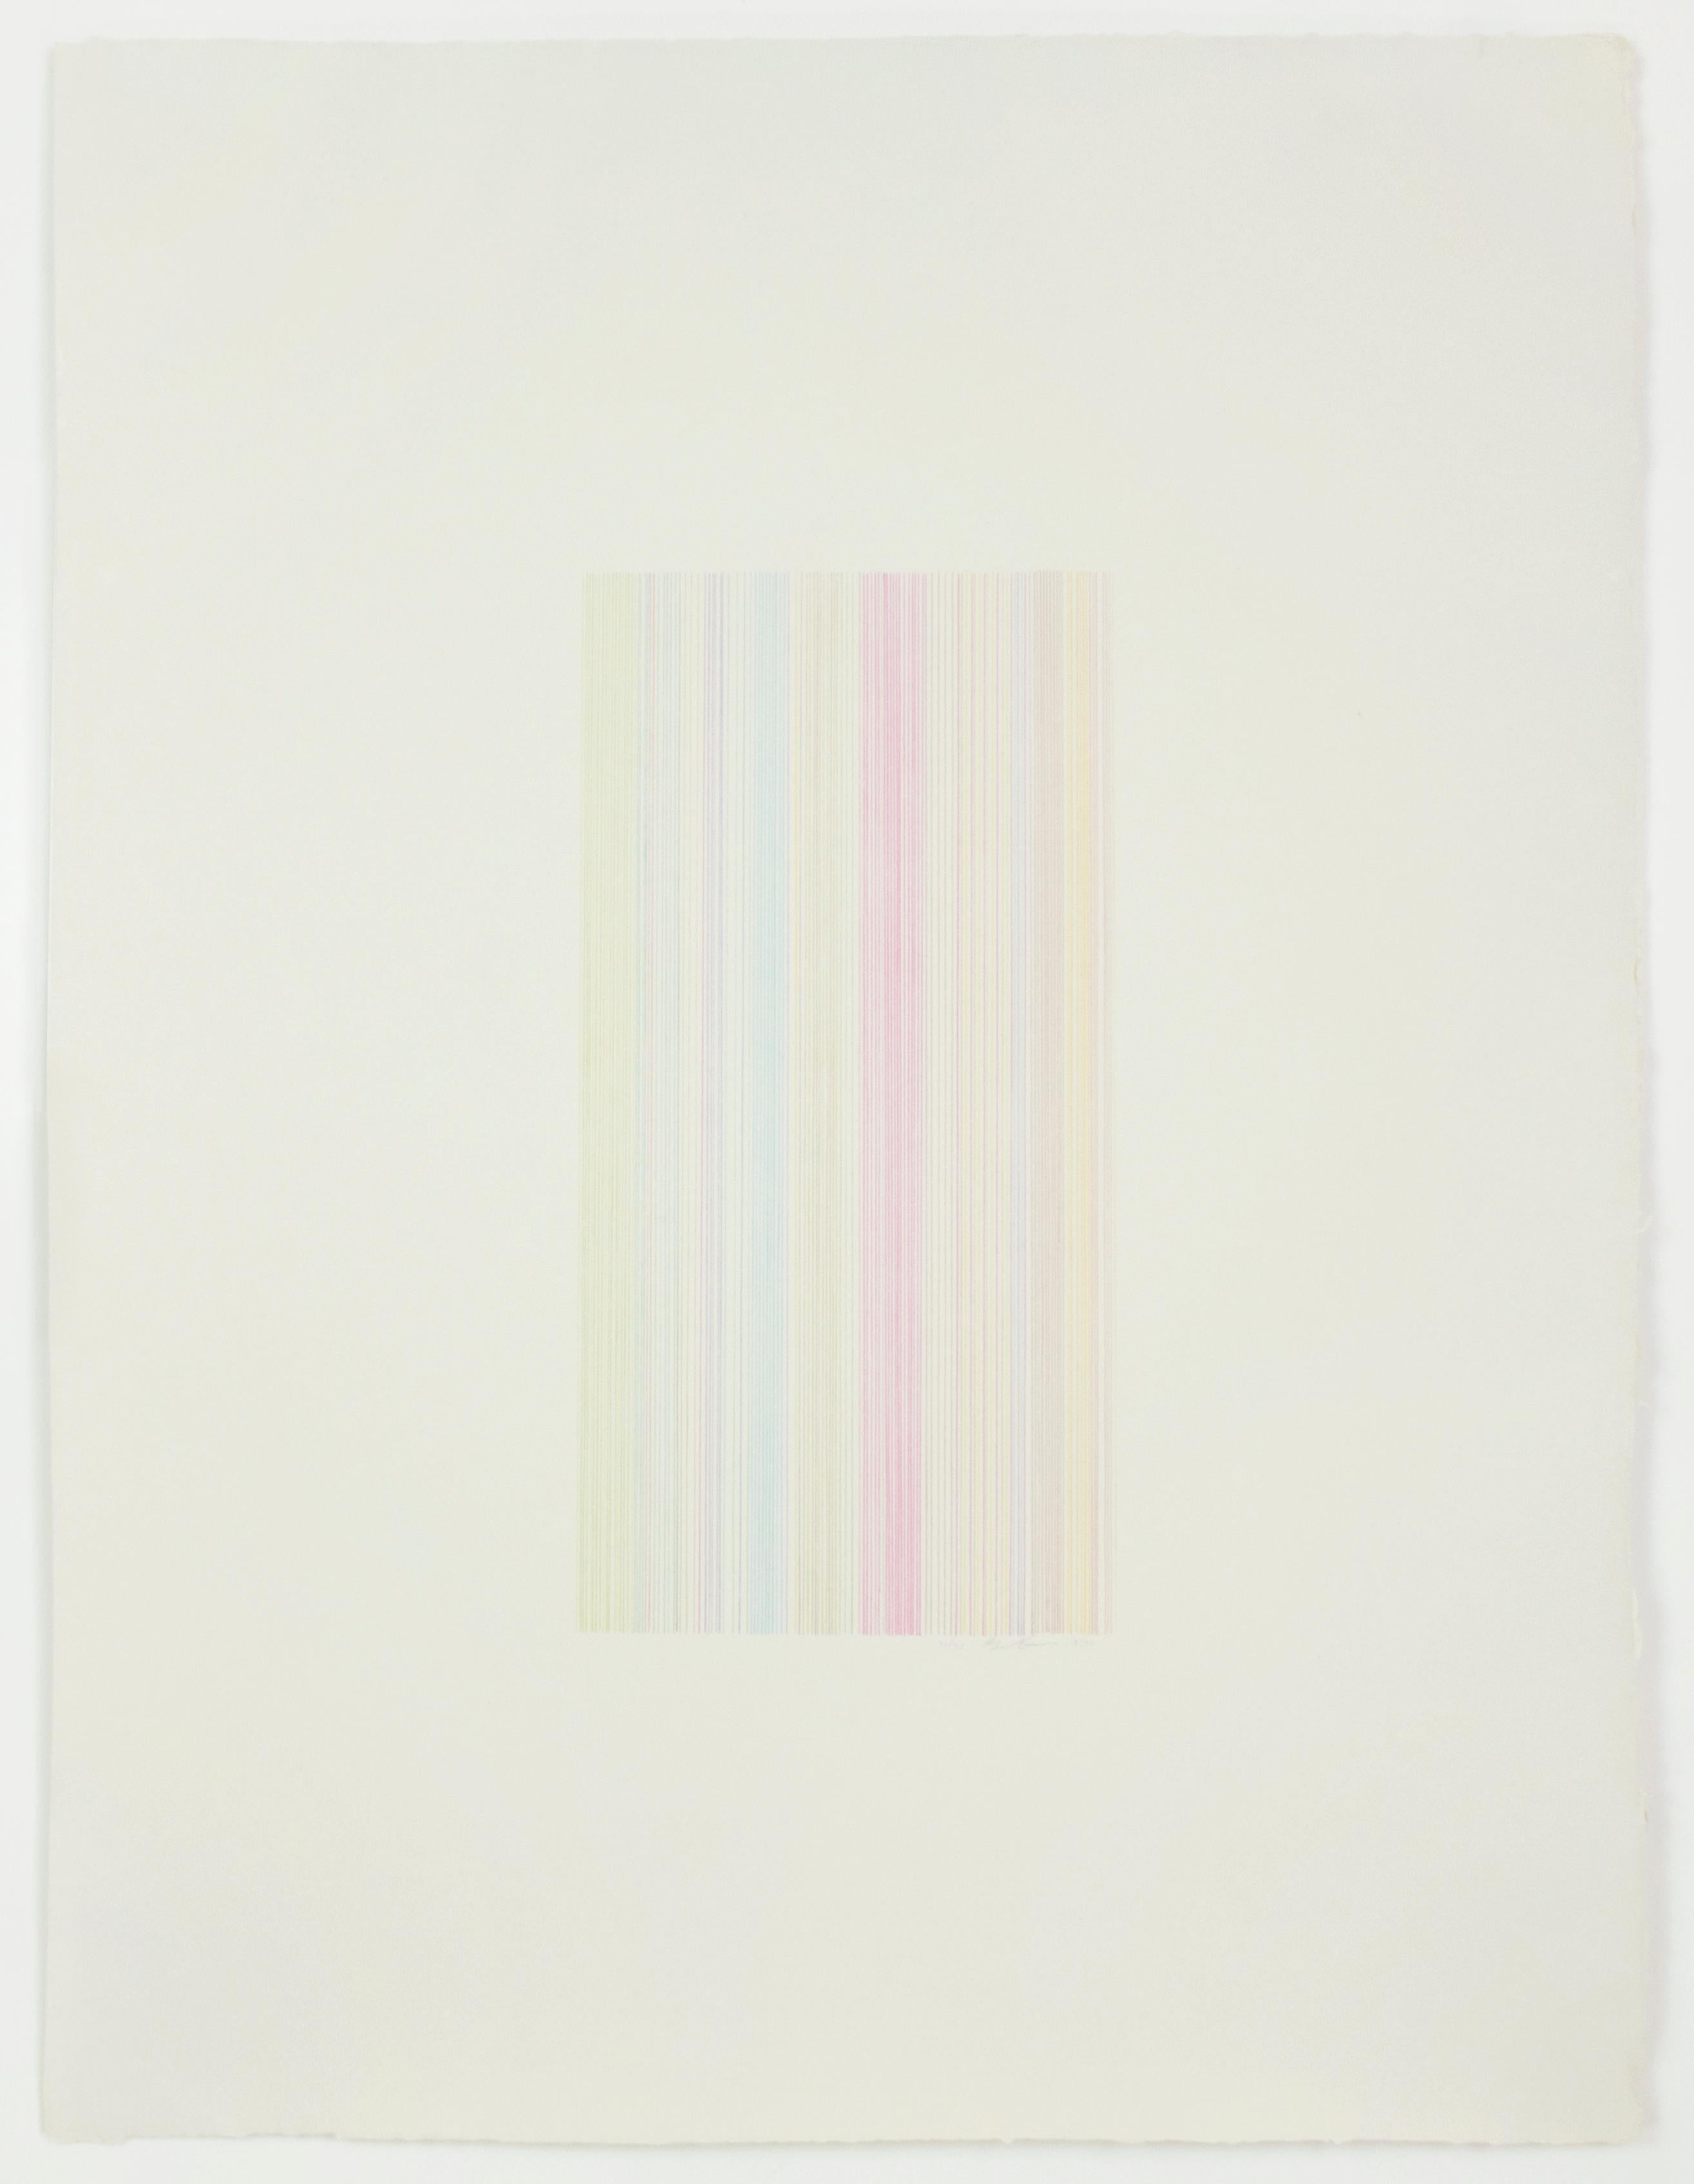 Gene Davis Abstract Print - Witch Doctor: abstract modern minimalist color field drawing with rainbow colors